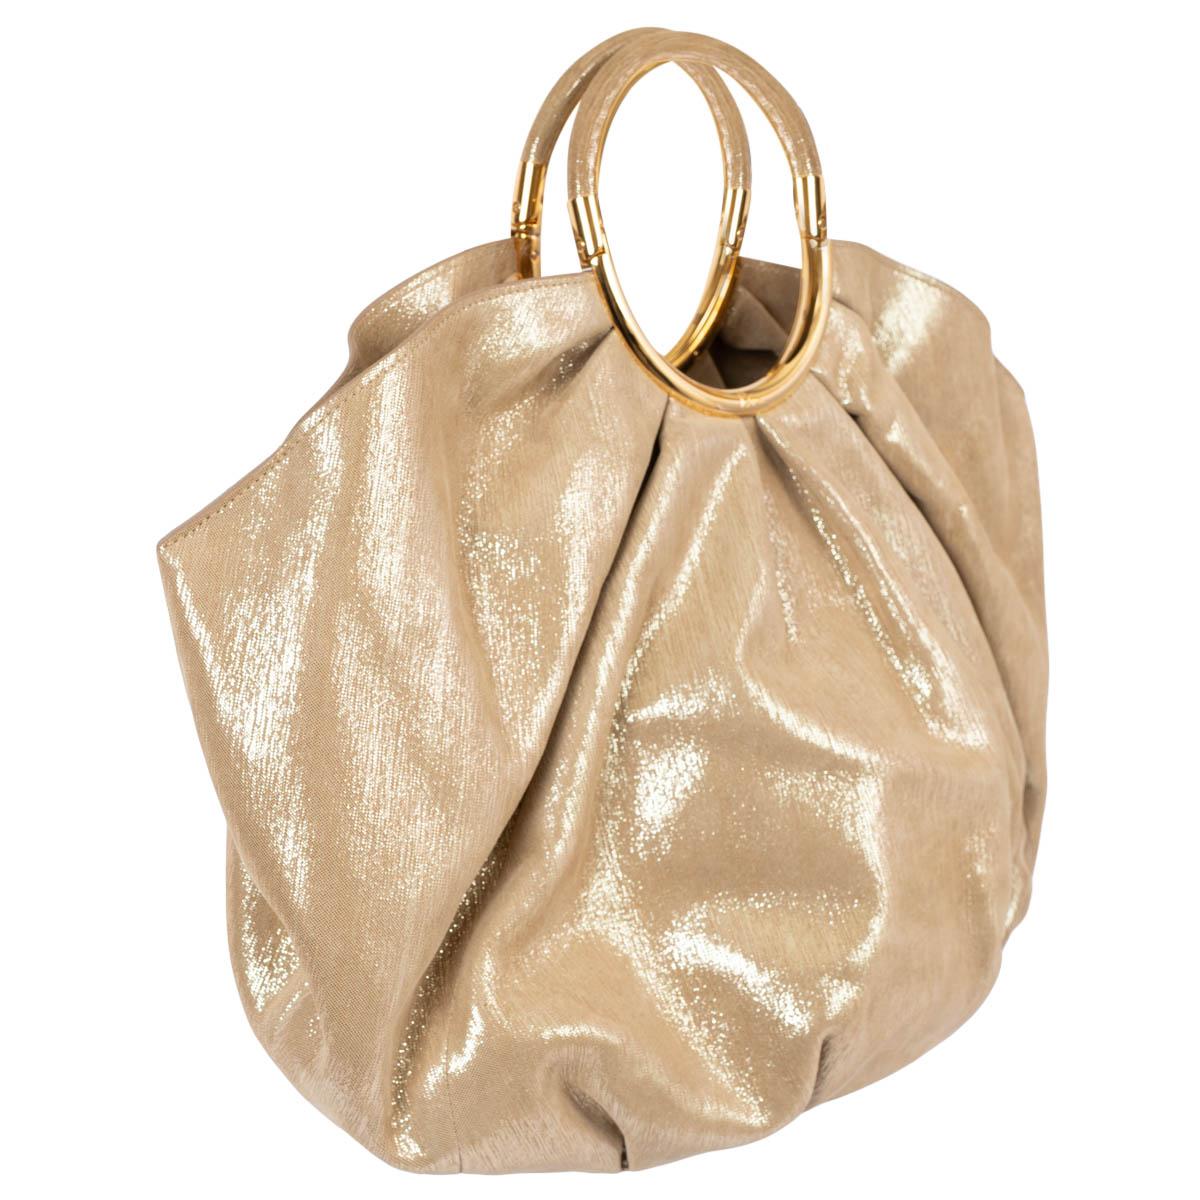 100% authentic Christian Dior soft Babe hobo handbag in shiny golden-beige leather featuring gold-tone hardware. The design has gathers and circular logo-engraved handles. Lined in ecru nylon. Comes with a zipped cosmetic pouch. Has been carried